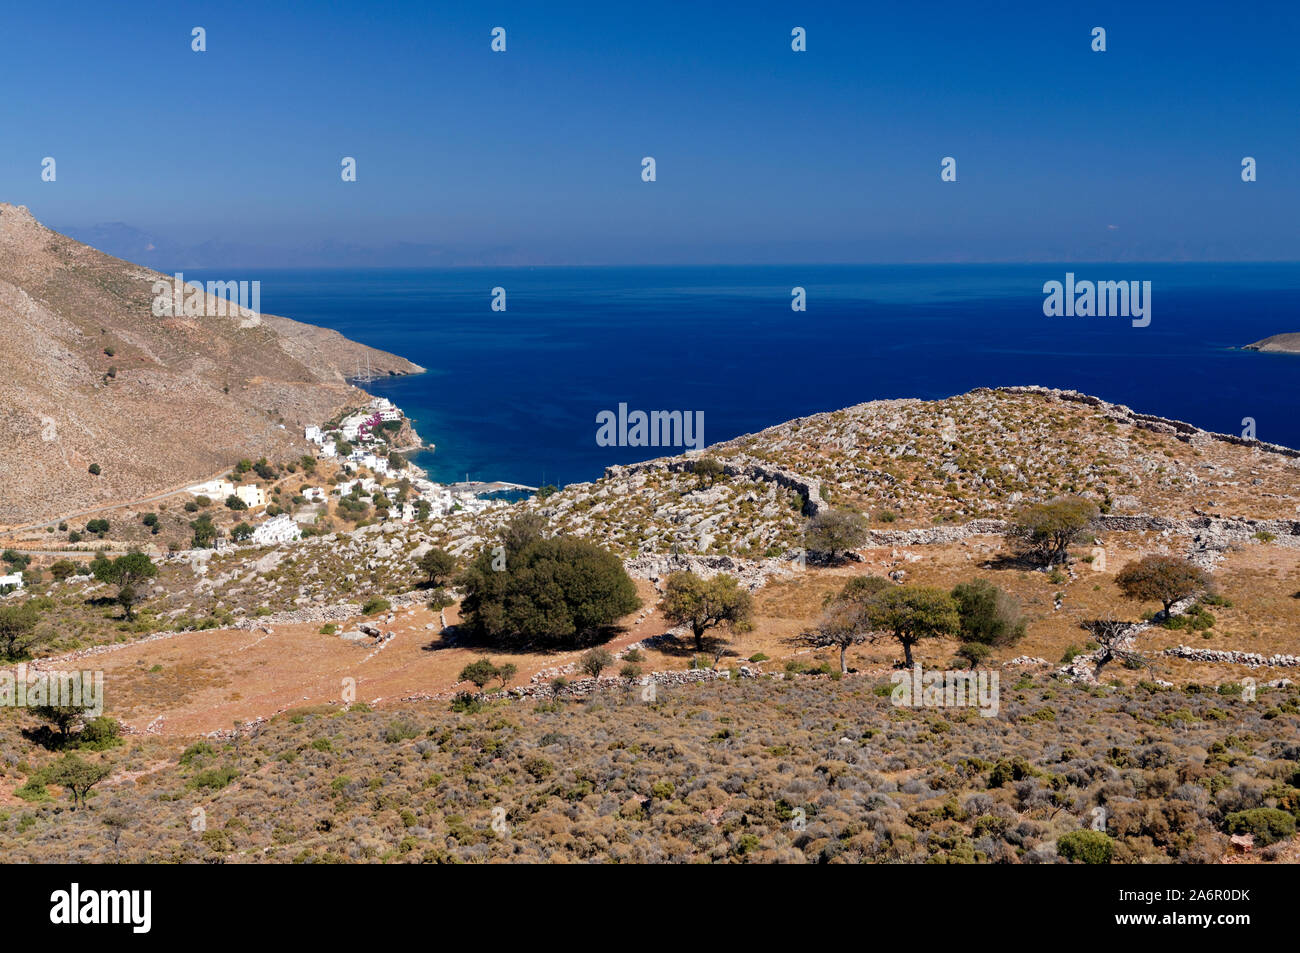 View of Liavdia bay from Gerontas, Tilos, Dodecanese islands, Southern Aegean, Greece. Stock Photo